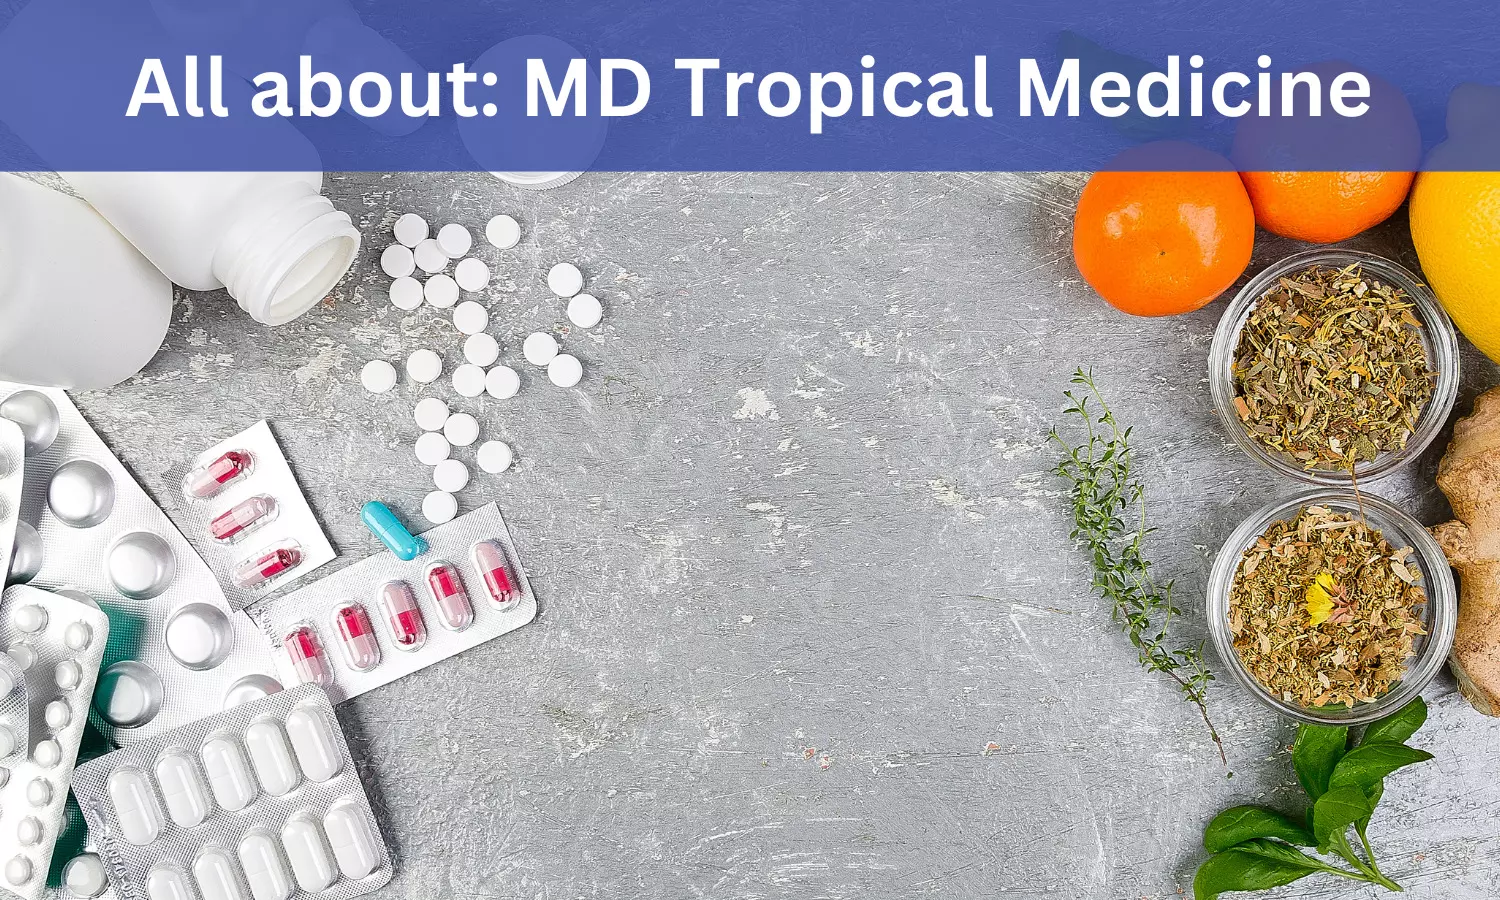 Doctor Of Medicine (MD) Tropical Medicine: Admission, Fees, Medical Colleges, Eligibility Criteria Details Here